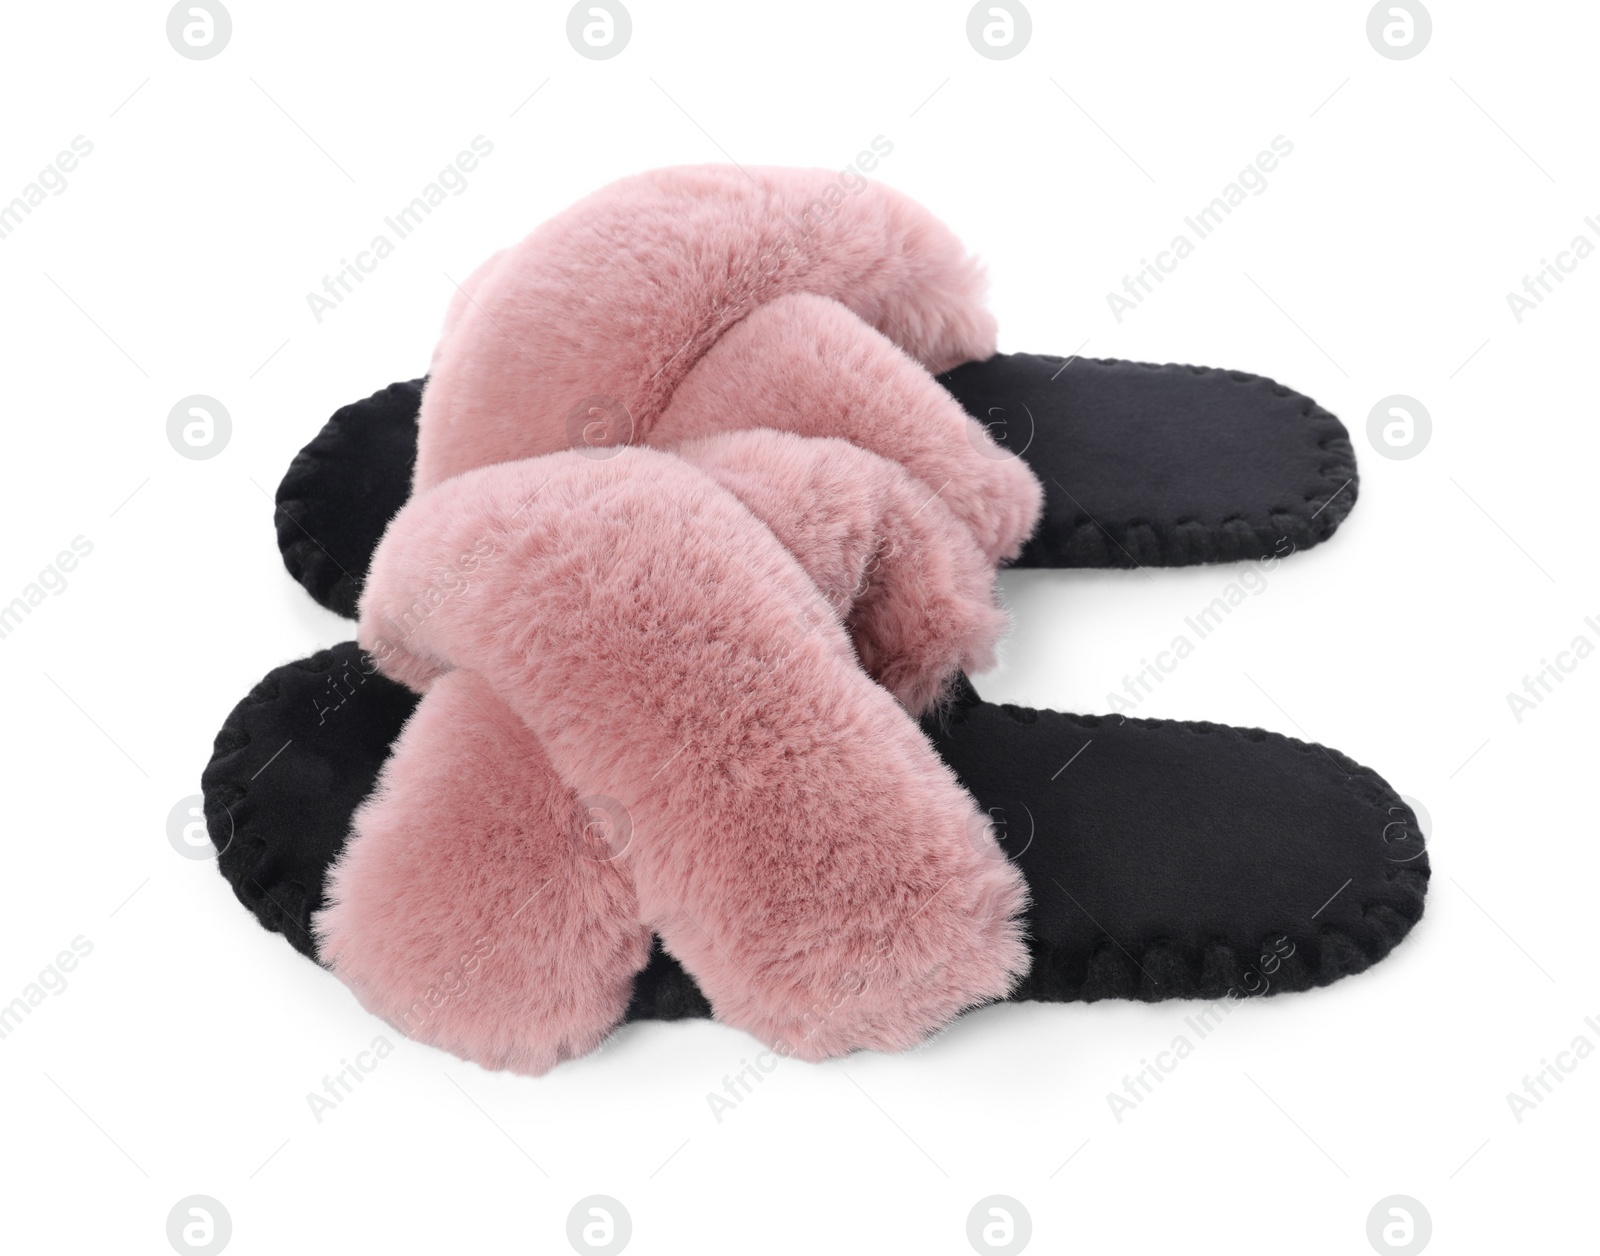 Photo of Pair of soft slippers isolated on white